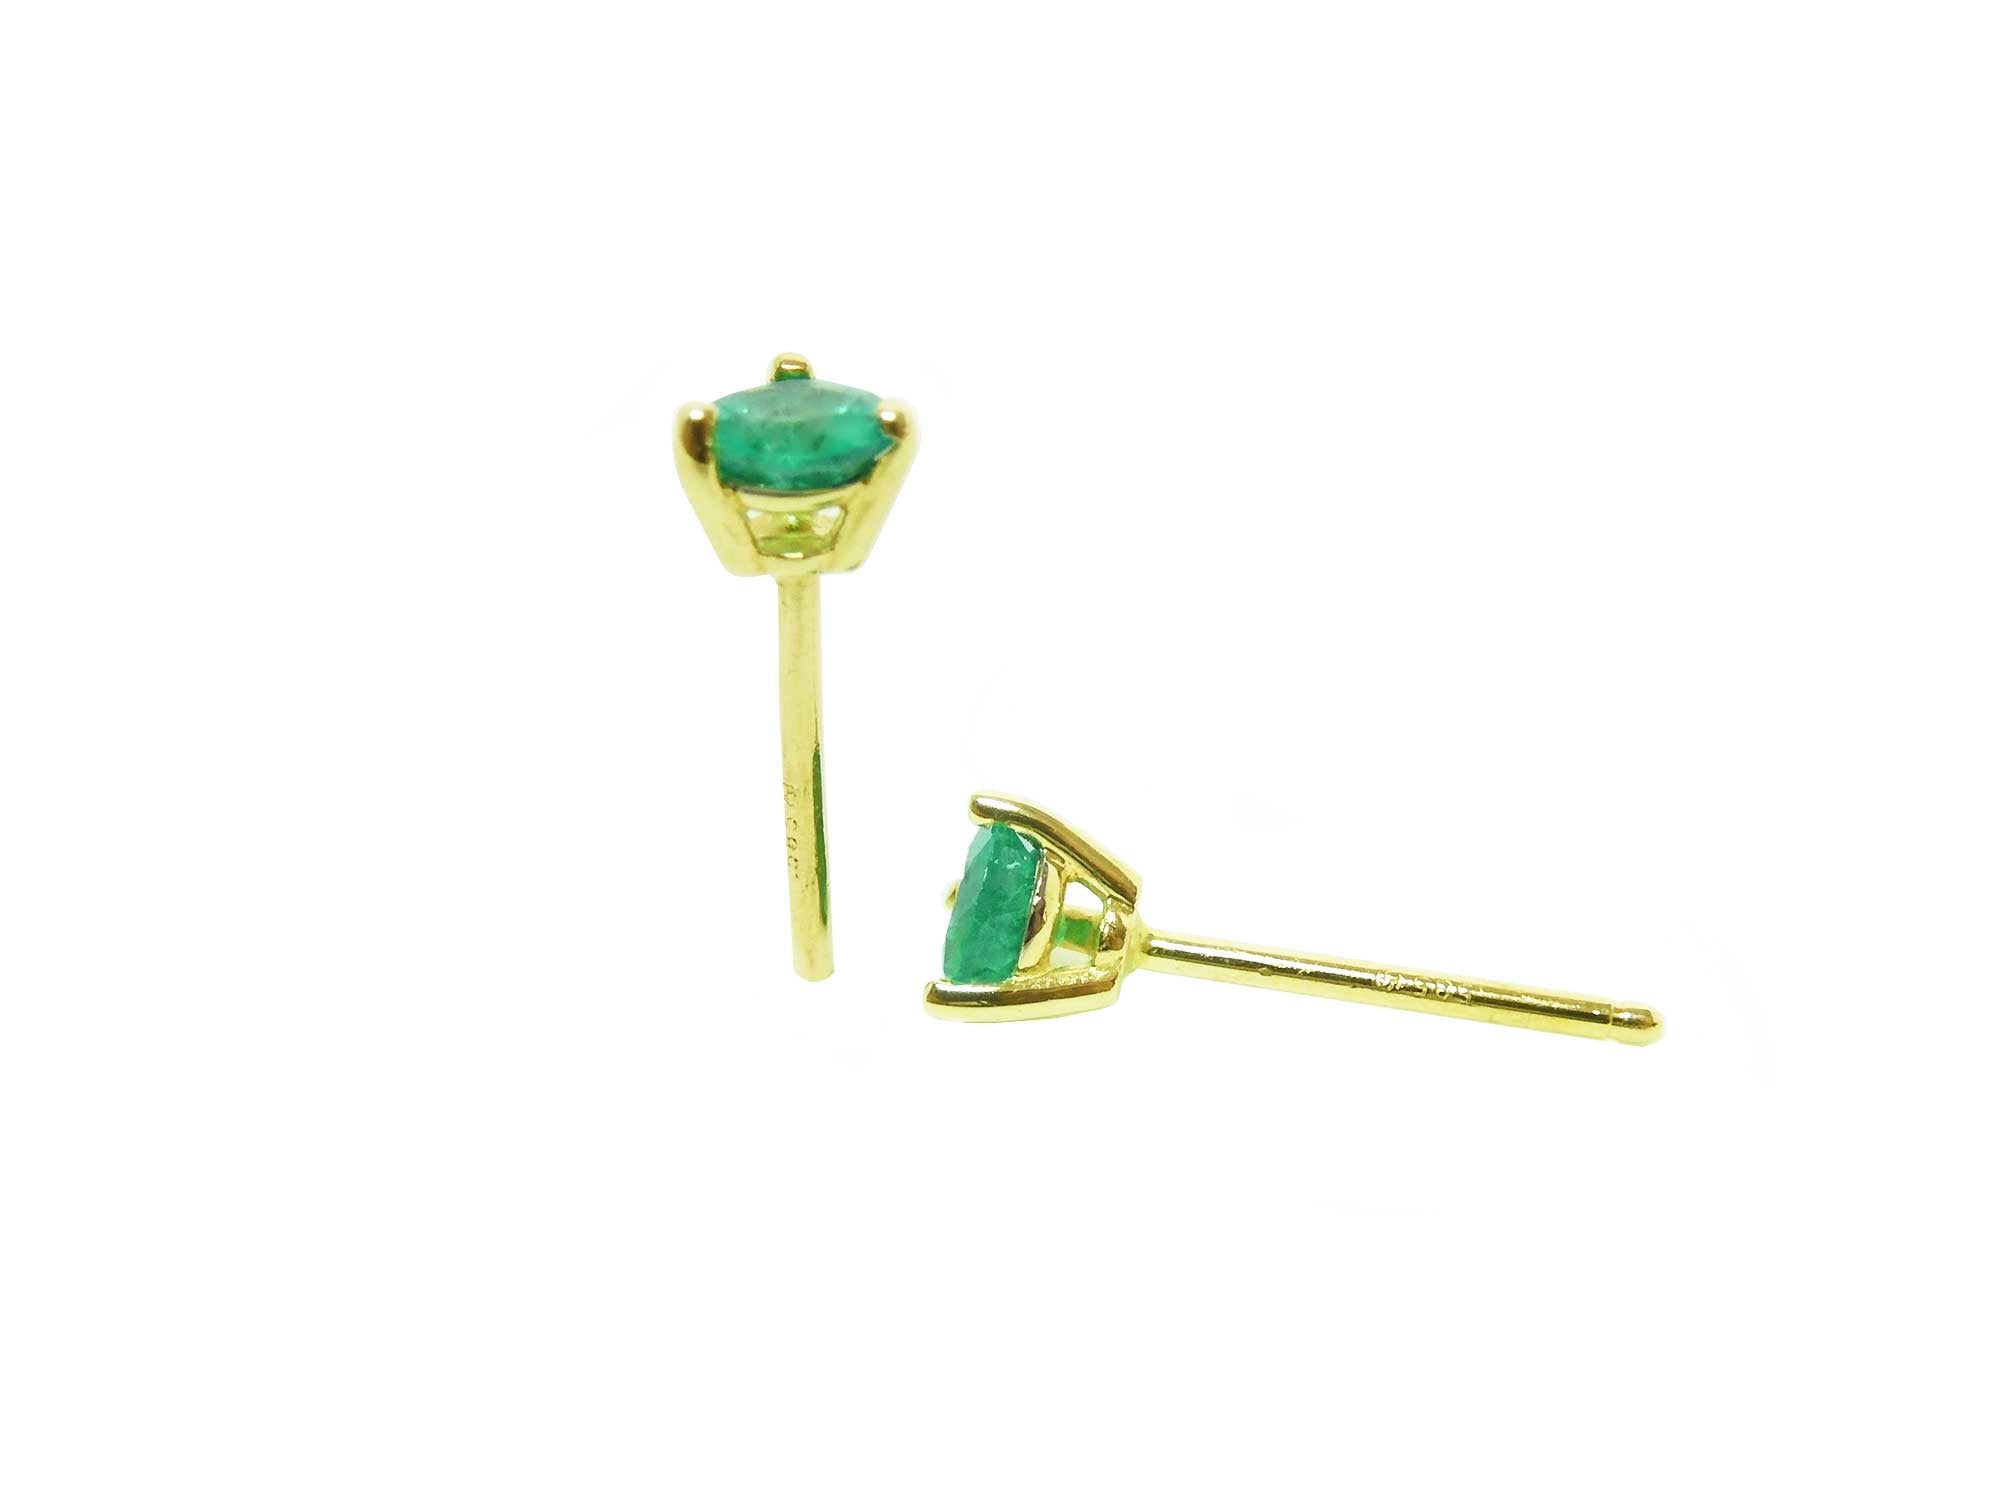 Solid yellow gold cocktail emerald stud earrings